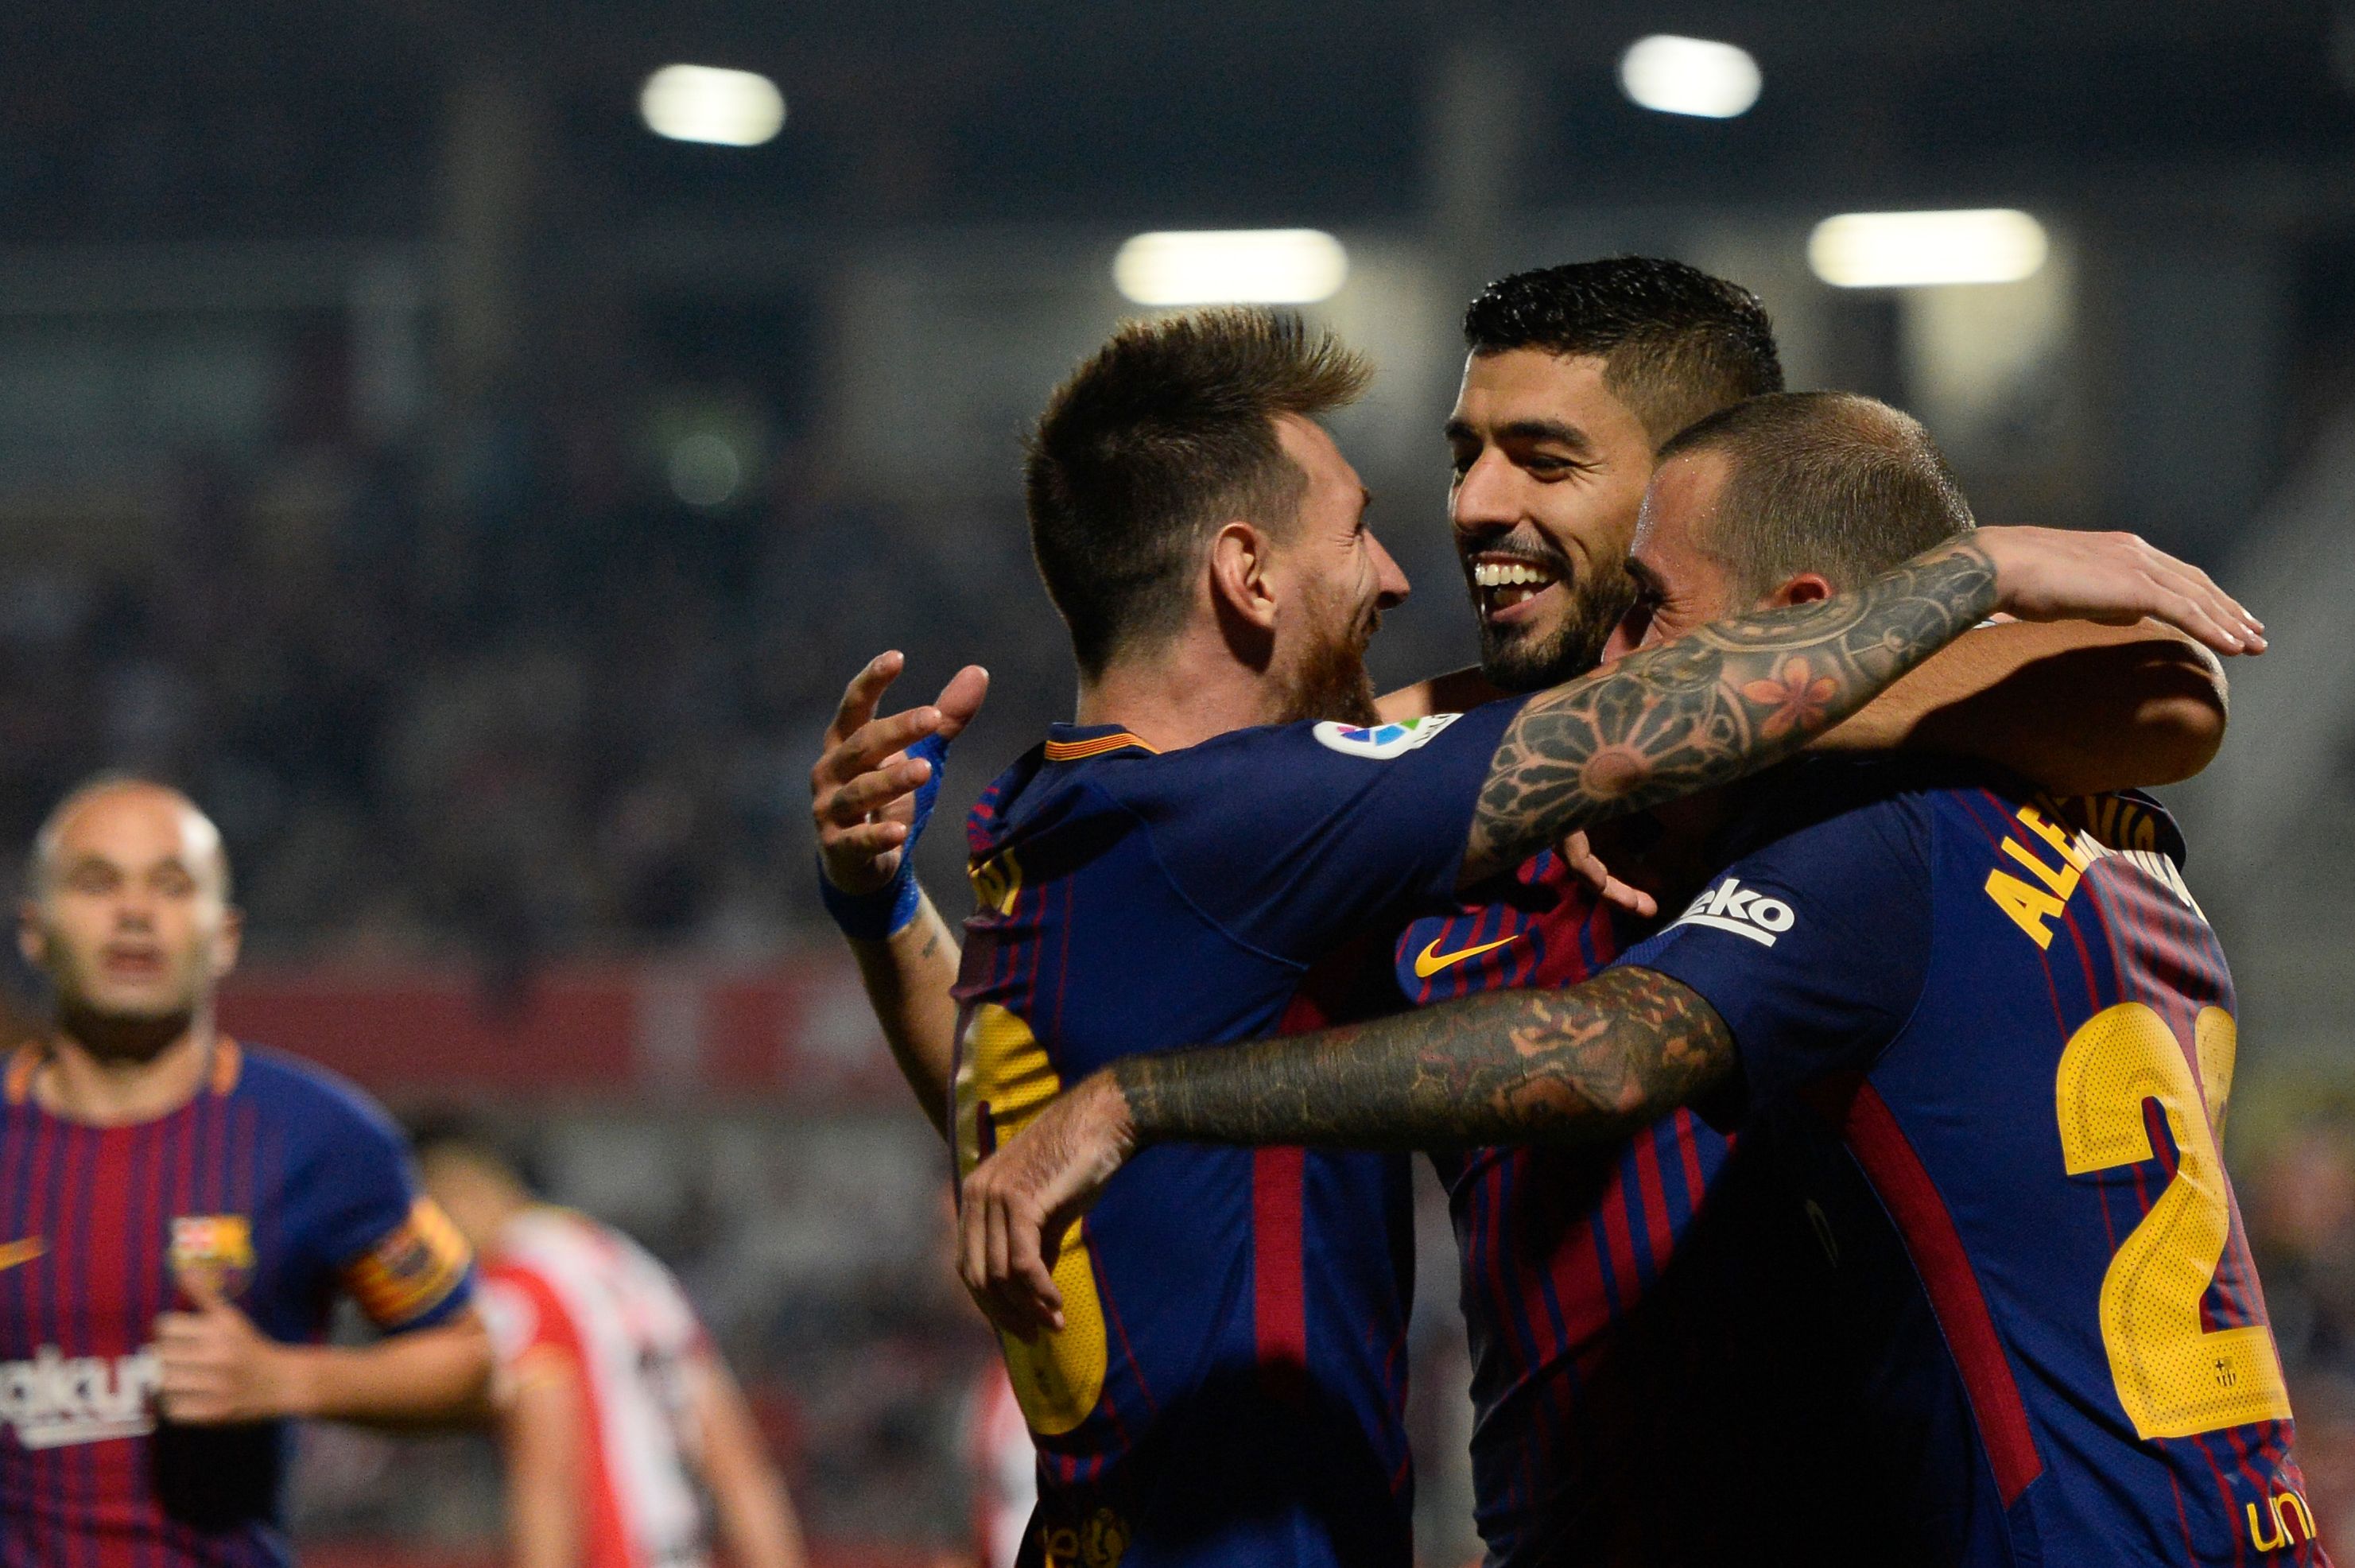 Barcelona's forward from Uruguay Luis Suarez (2ndR) celebrates with Barcelona's forward from Argentina Lionel Messi (2ndL) and a teammate after scoring during the Spanish league football match Girona FC vs FC Barcelona at the Montilivi stadium in Girona on September 23, 2017. / AFP PHOTO / Josep LAGO        (Photo credit should read JOSEP LAGO/AFP/Getty Images)